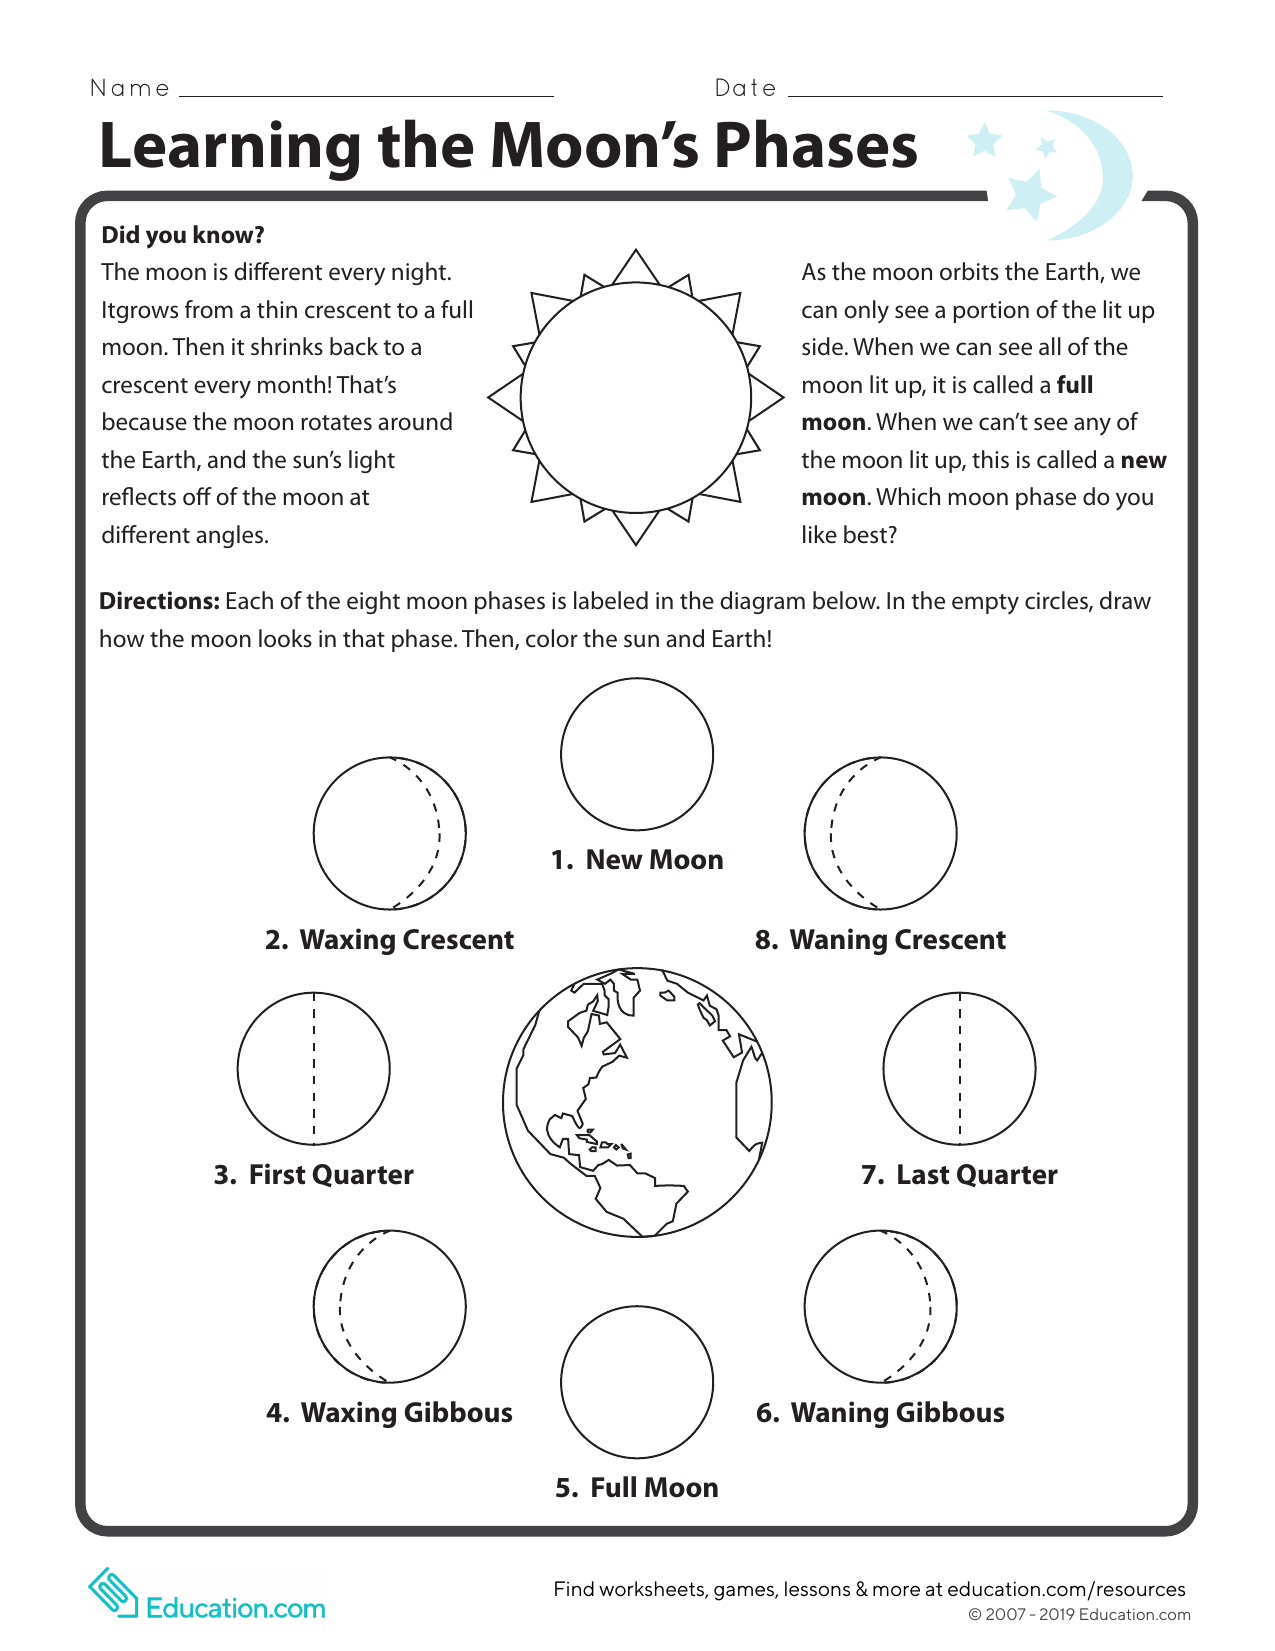 learning-moon-phases Inside Moon Phases Worksheet Pdf